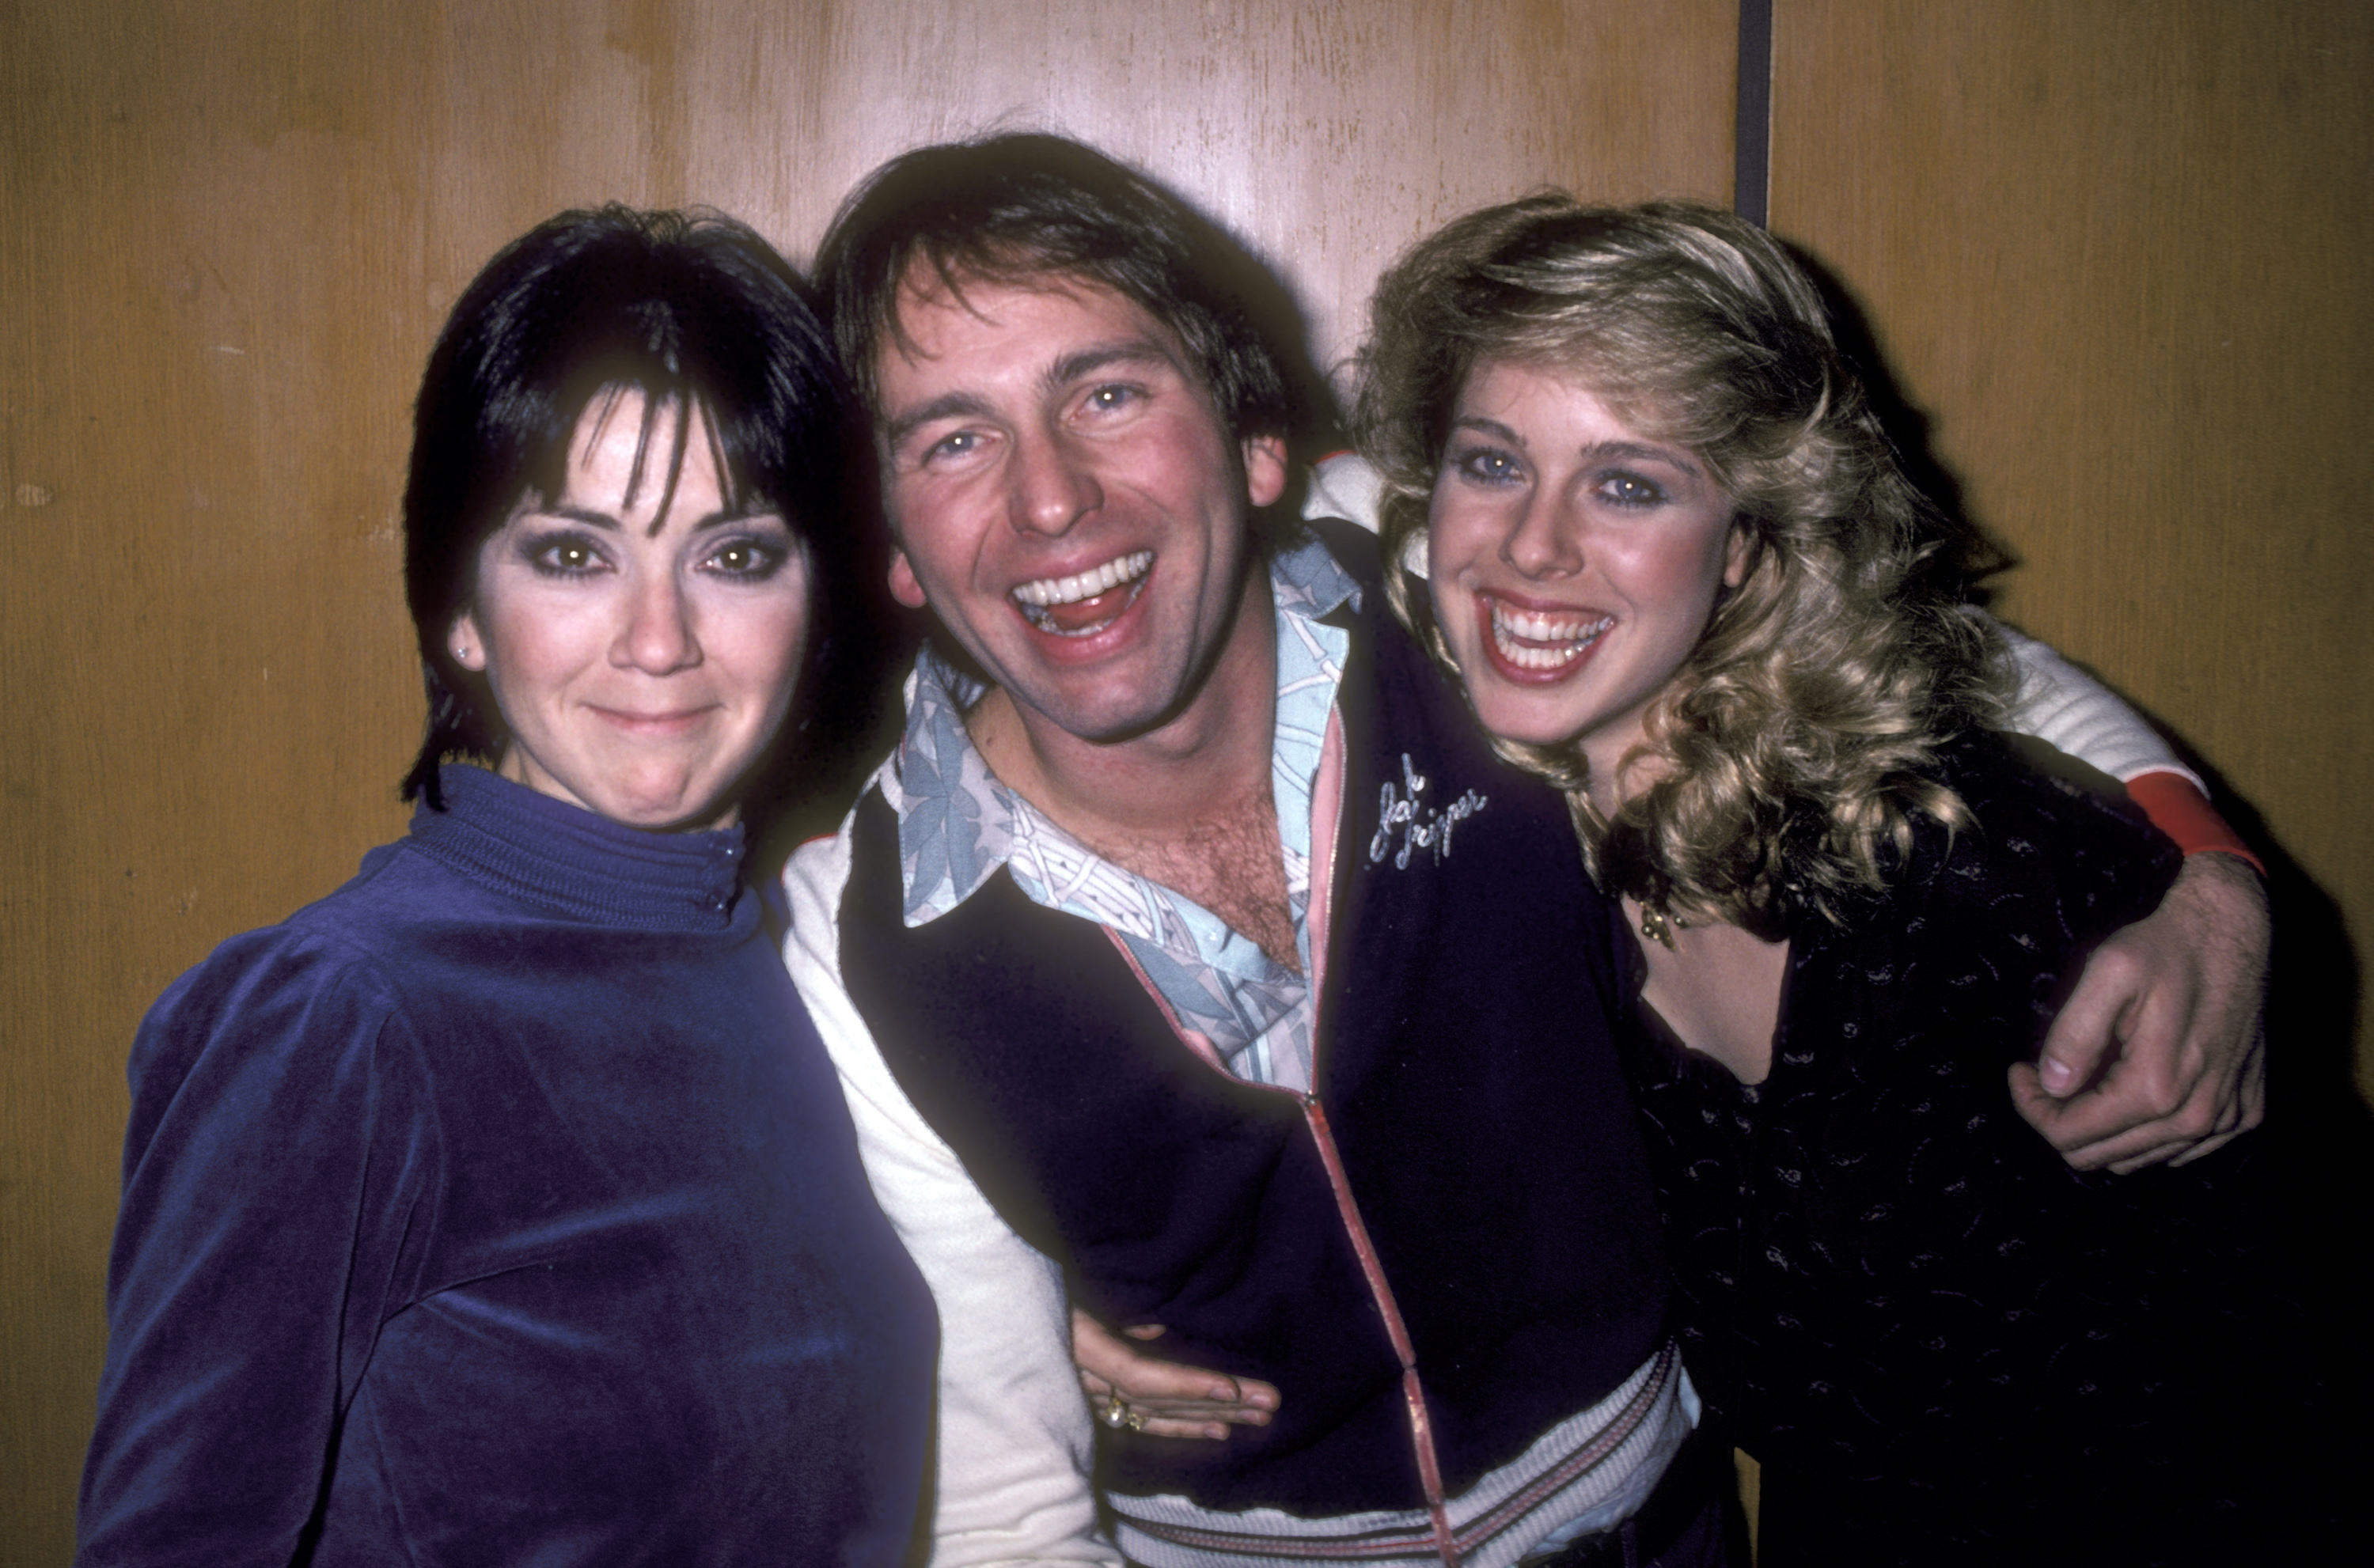 Joyce DeWitt, John Ritter, and Jenilee Harrison attend the "Angel Dusted" screening at DGA Theater on February 13, 1981 in West Hollywood, California | Source: Getty Images